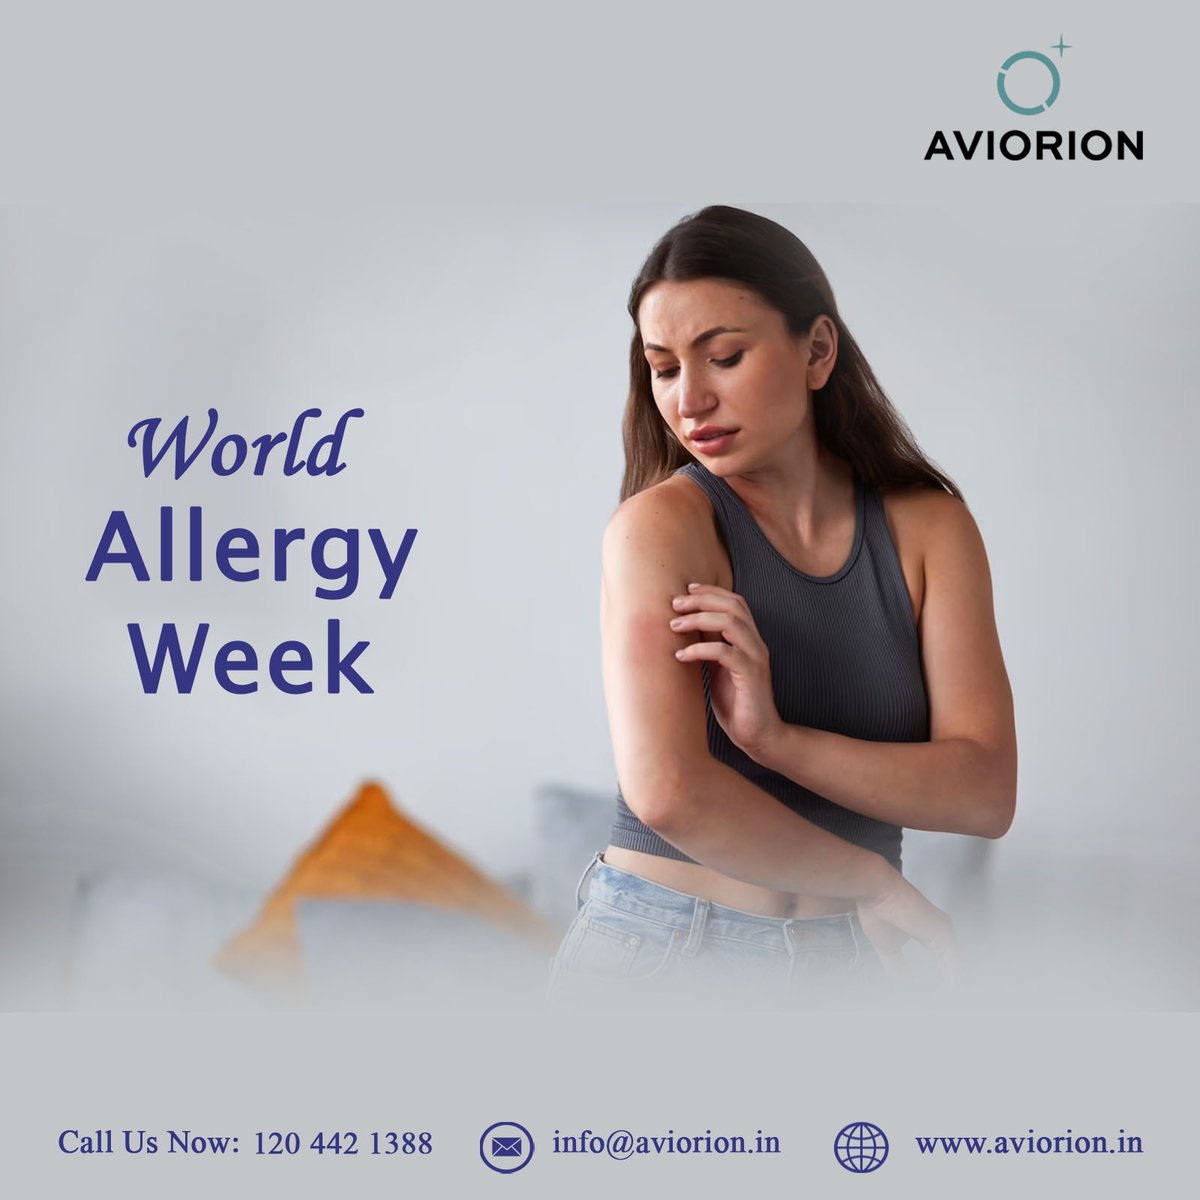 Happy World Allergy Awareness Week to everyone. Allergic reactions need us to be aware and not react in a wrong manner.
#aviorion #aviorionpvtltd #allergyawarenessweek #worldallergyweek #allergies #wellness #allergyseason #health #allergy #allergyaware